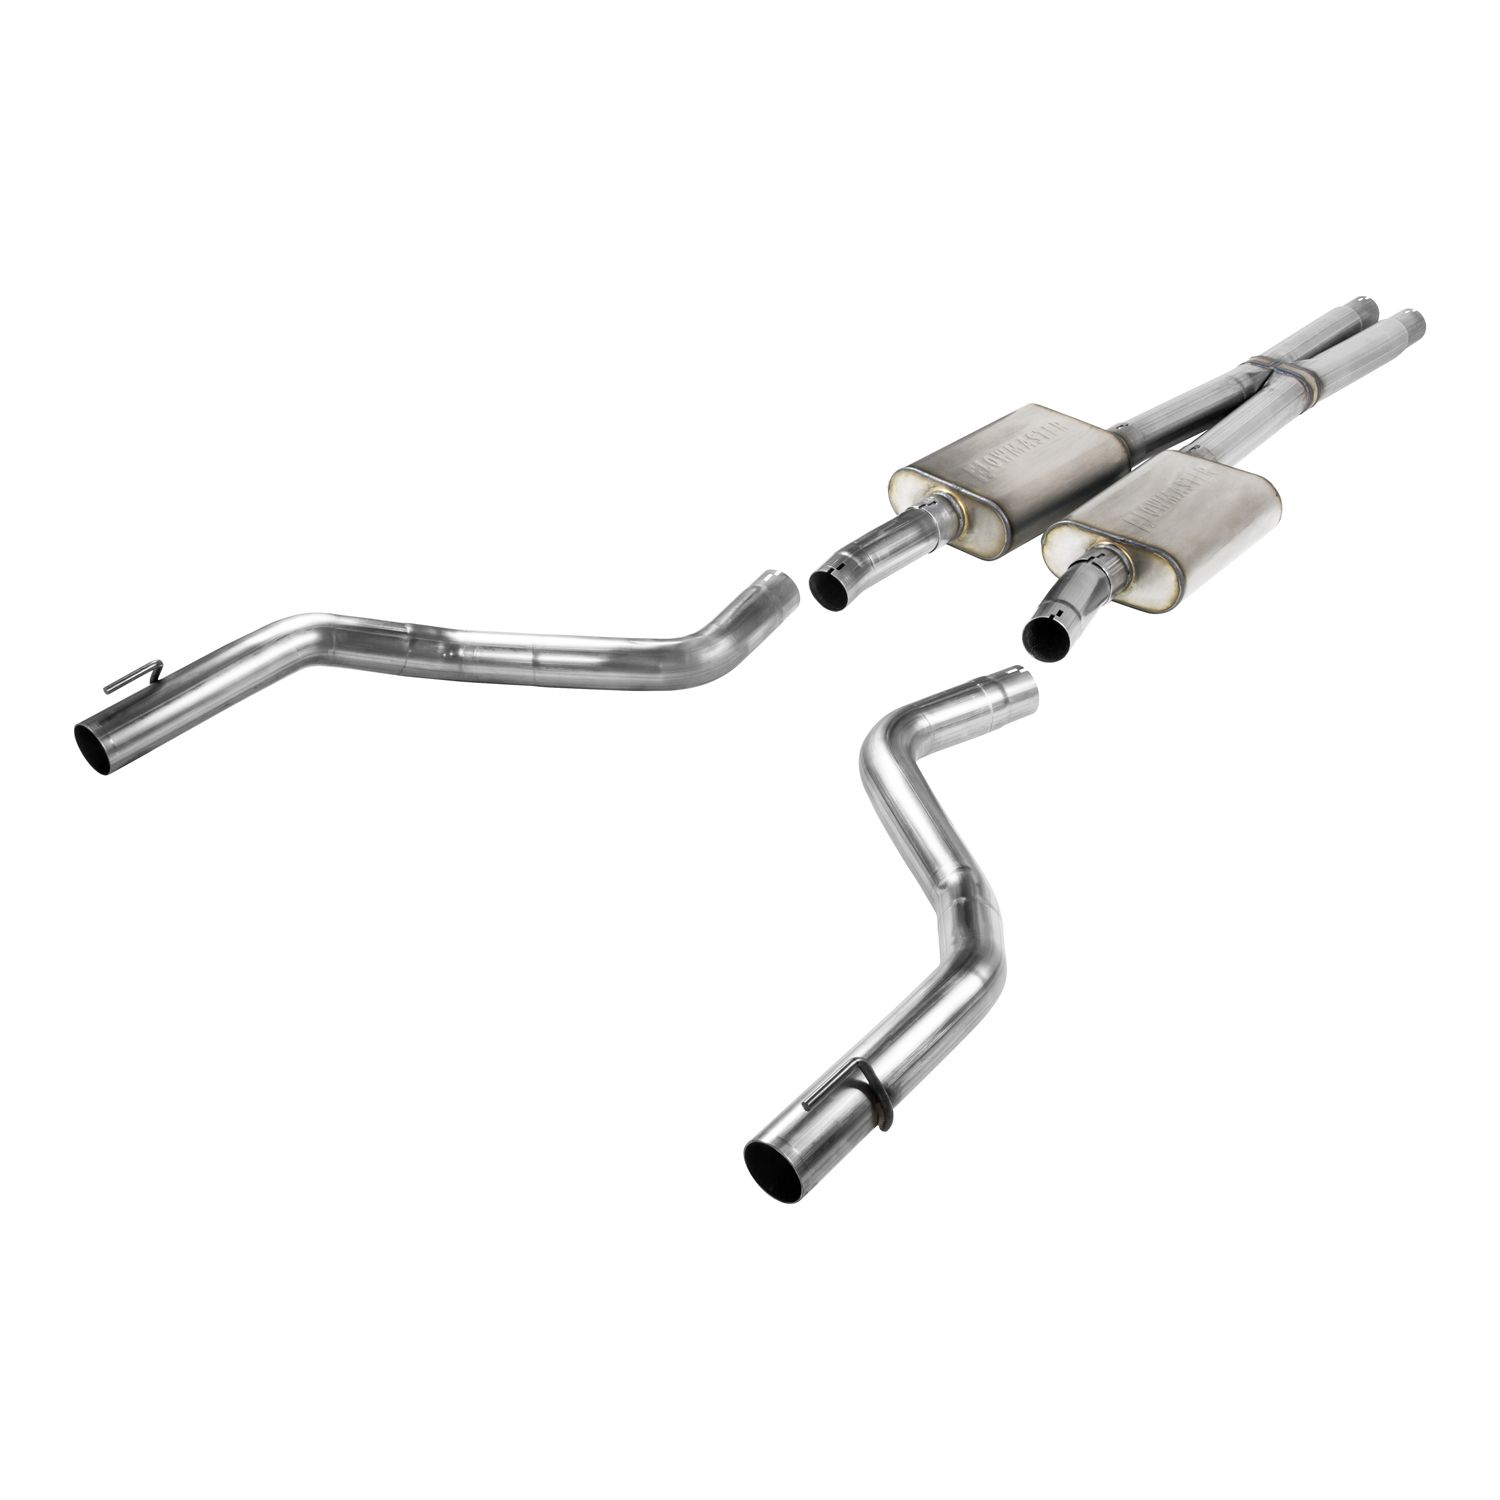 2017+ Dodge Charger R/T 5.7L Flowmaster FlowFX 409SS Catback Exhaust System